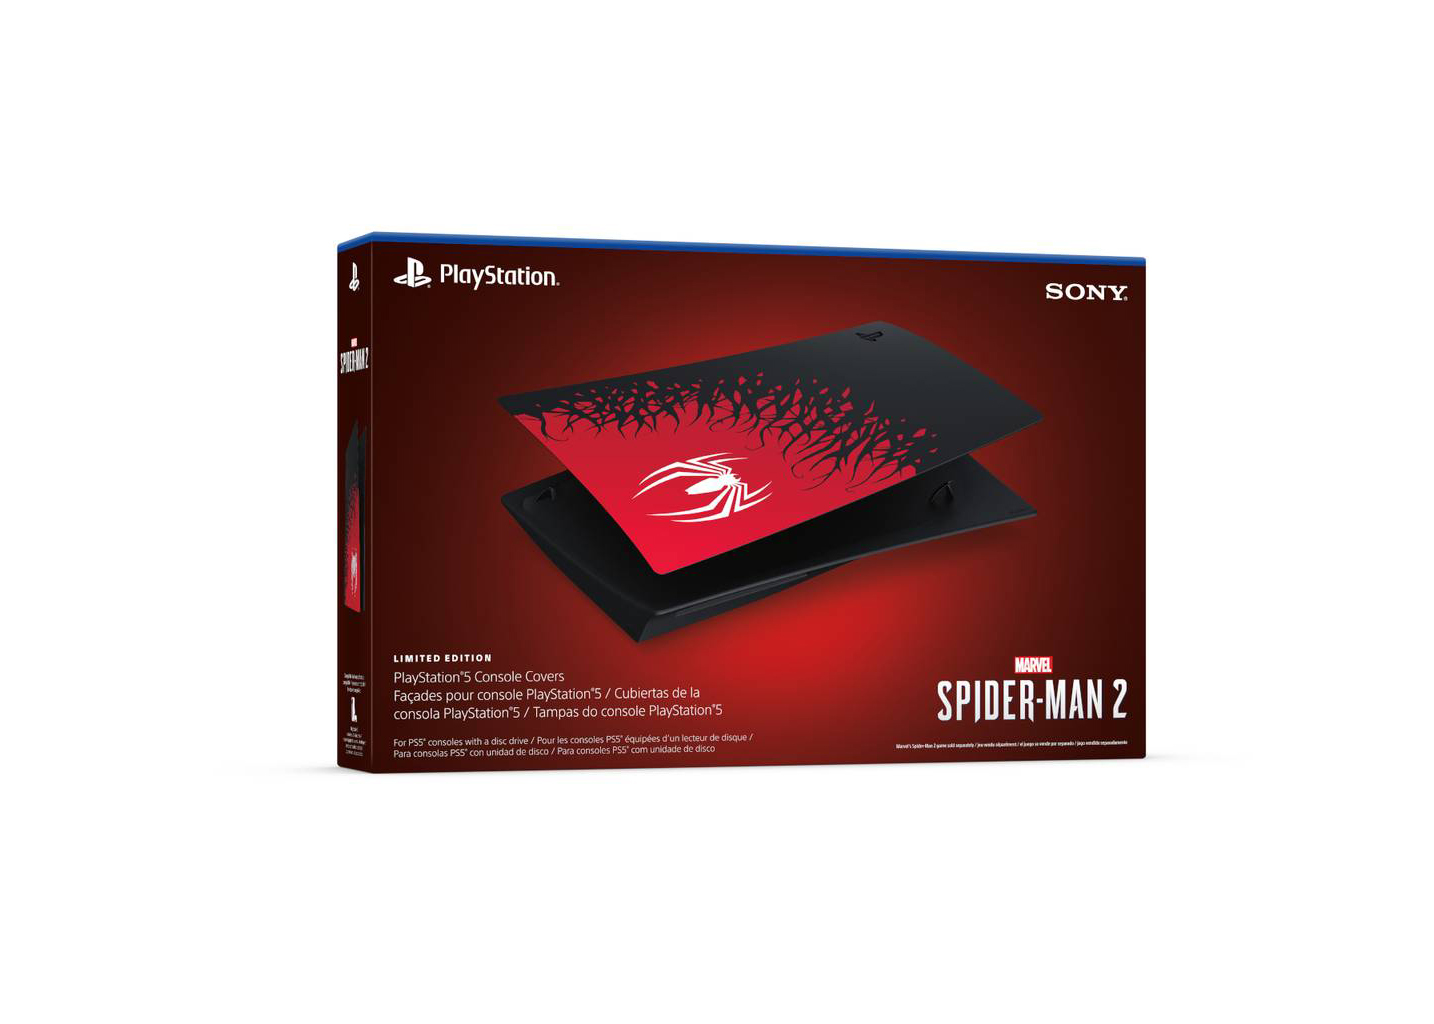 PS5 Console Cover ディスク版　カバー　スパイダーマン2